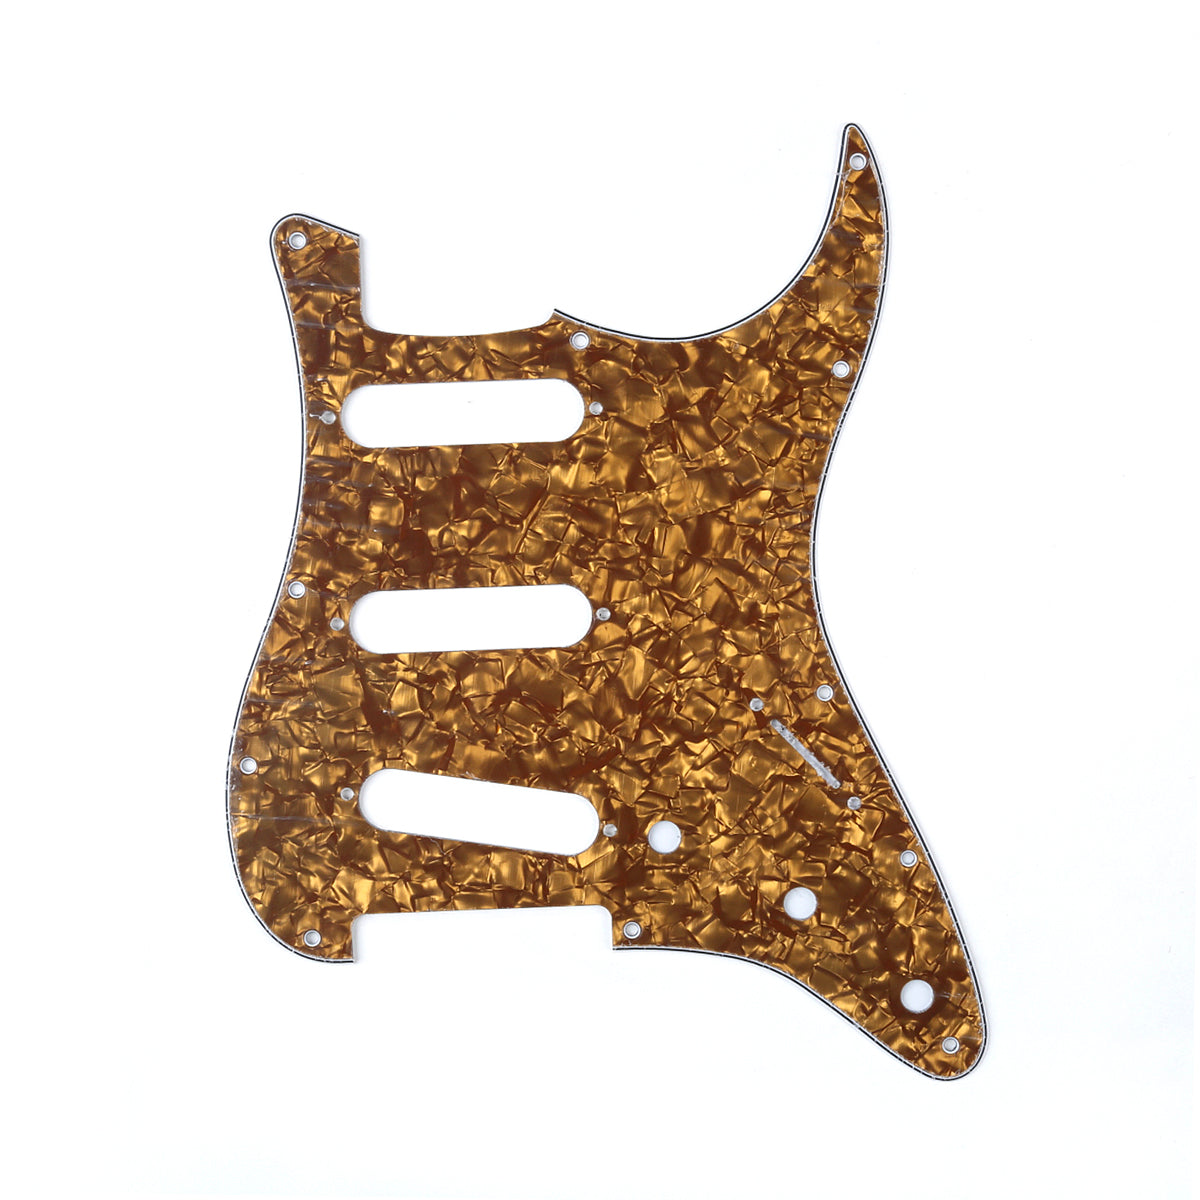 Musiclily SSS 11 Hole Strat Guitar Pickguard for Fender USA/Mexican Made Standard Stratocaster Modern Style, 4Ply Bronze Pearl